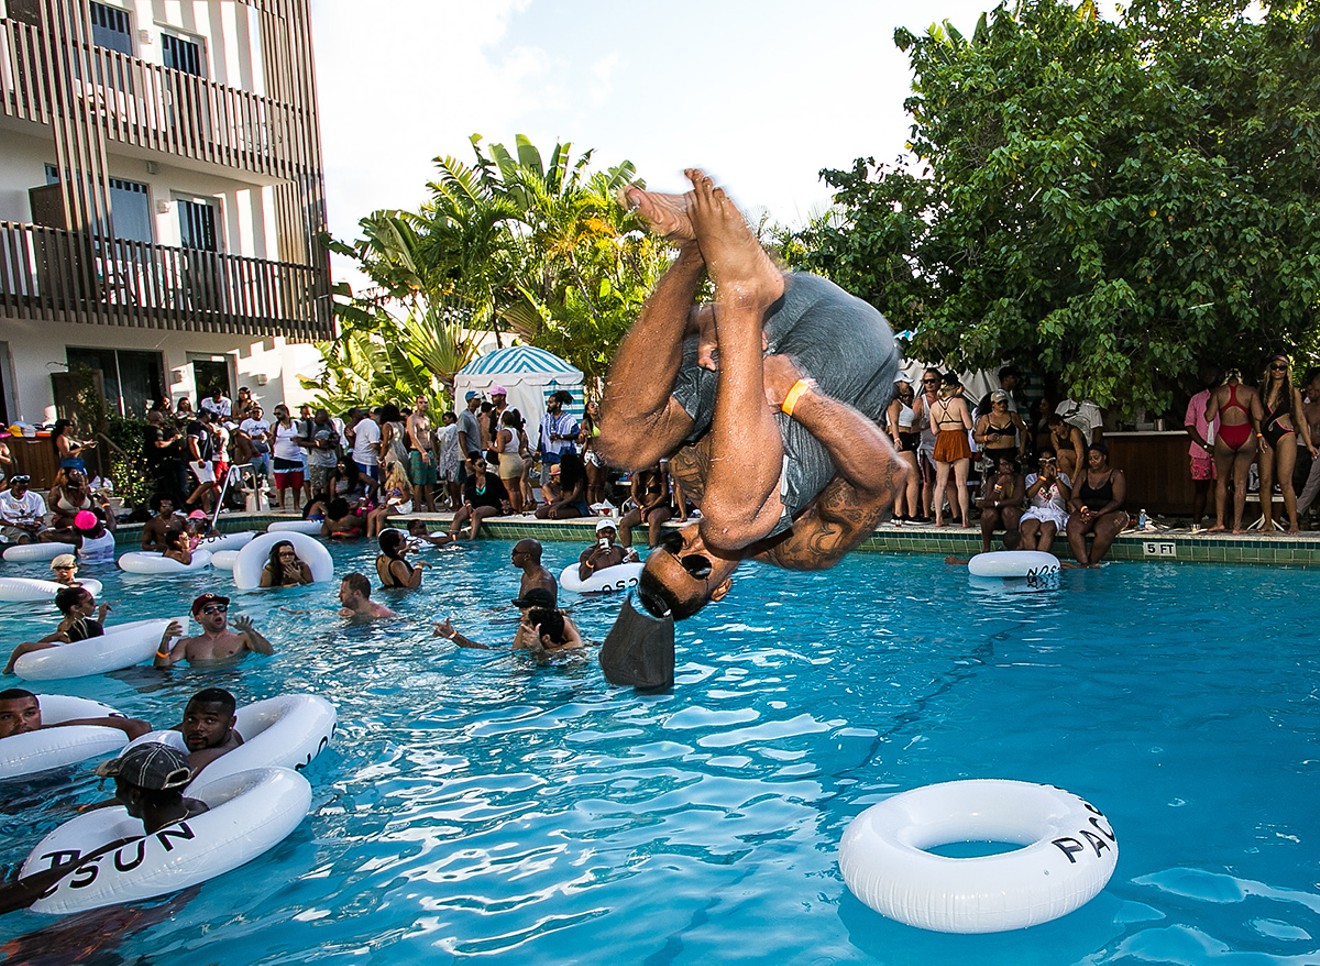 Cut a rug or make a splash at some of Miami Music Week's best pool parties.